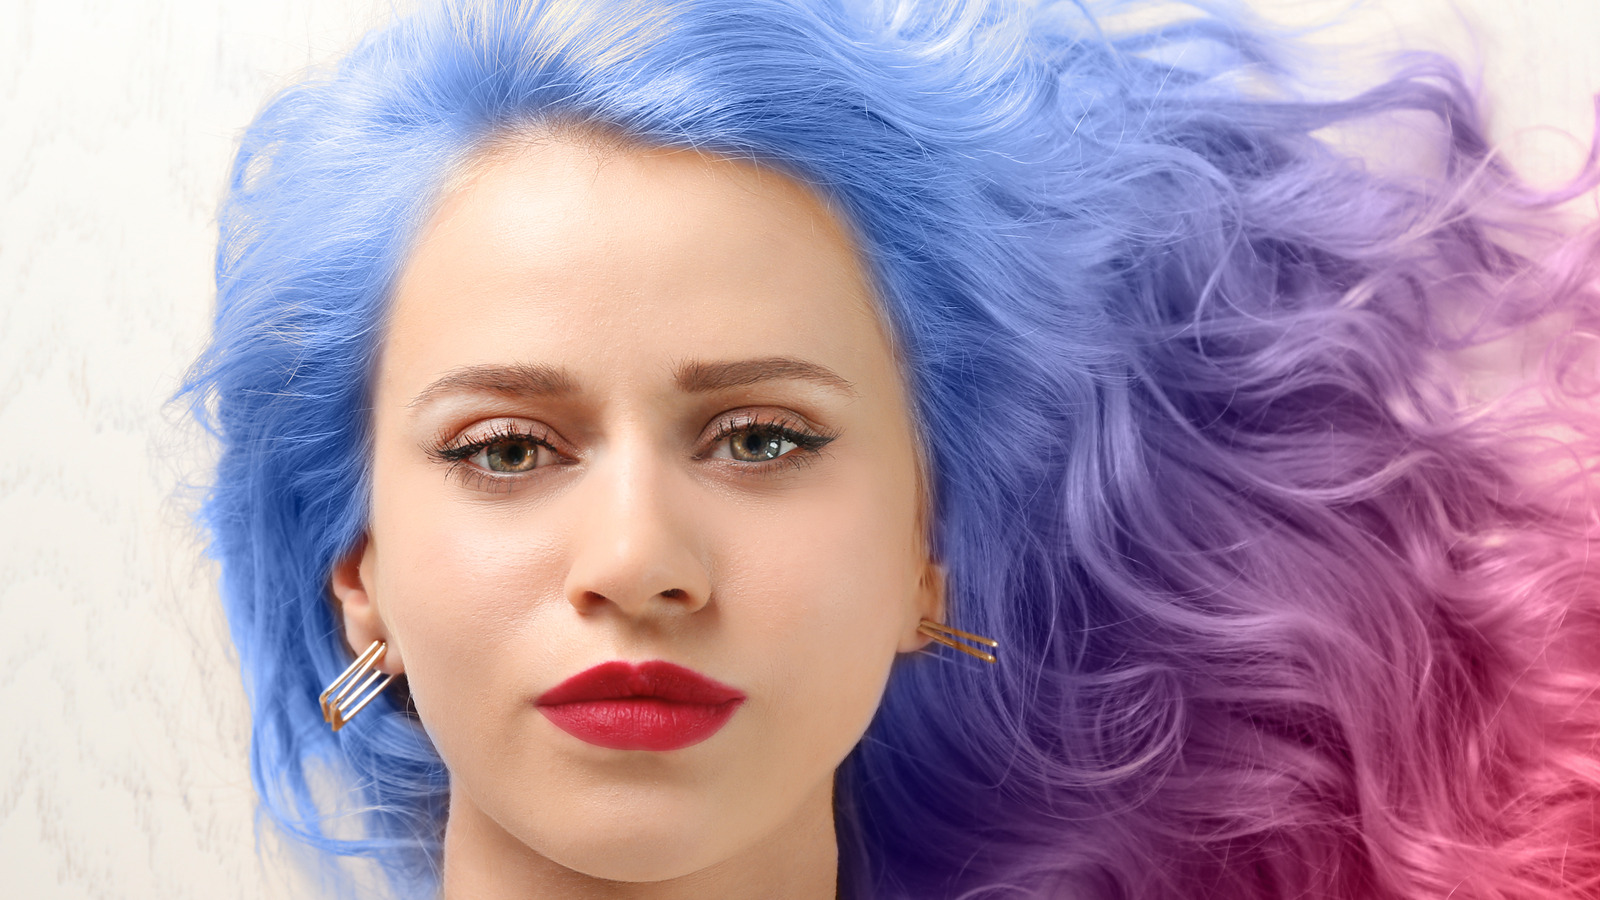 The Hair Color Nearly 50% Of People Say They Would Never Dye Their Hair